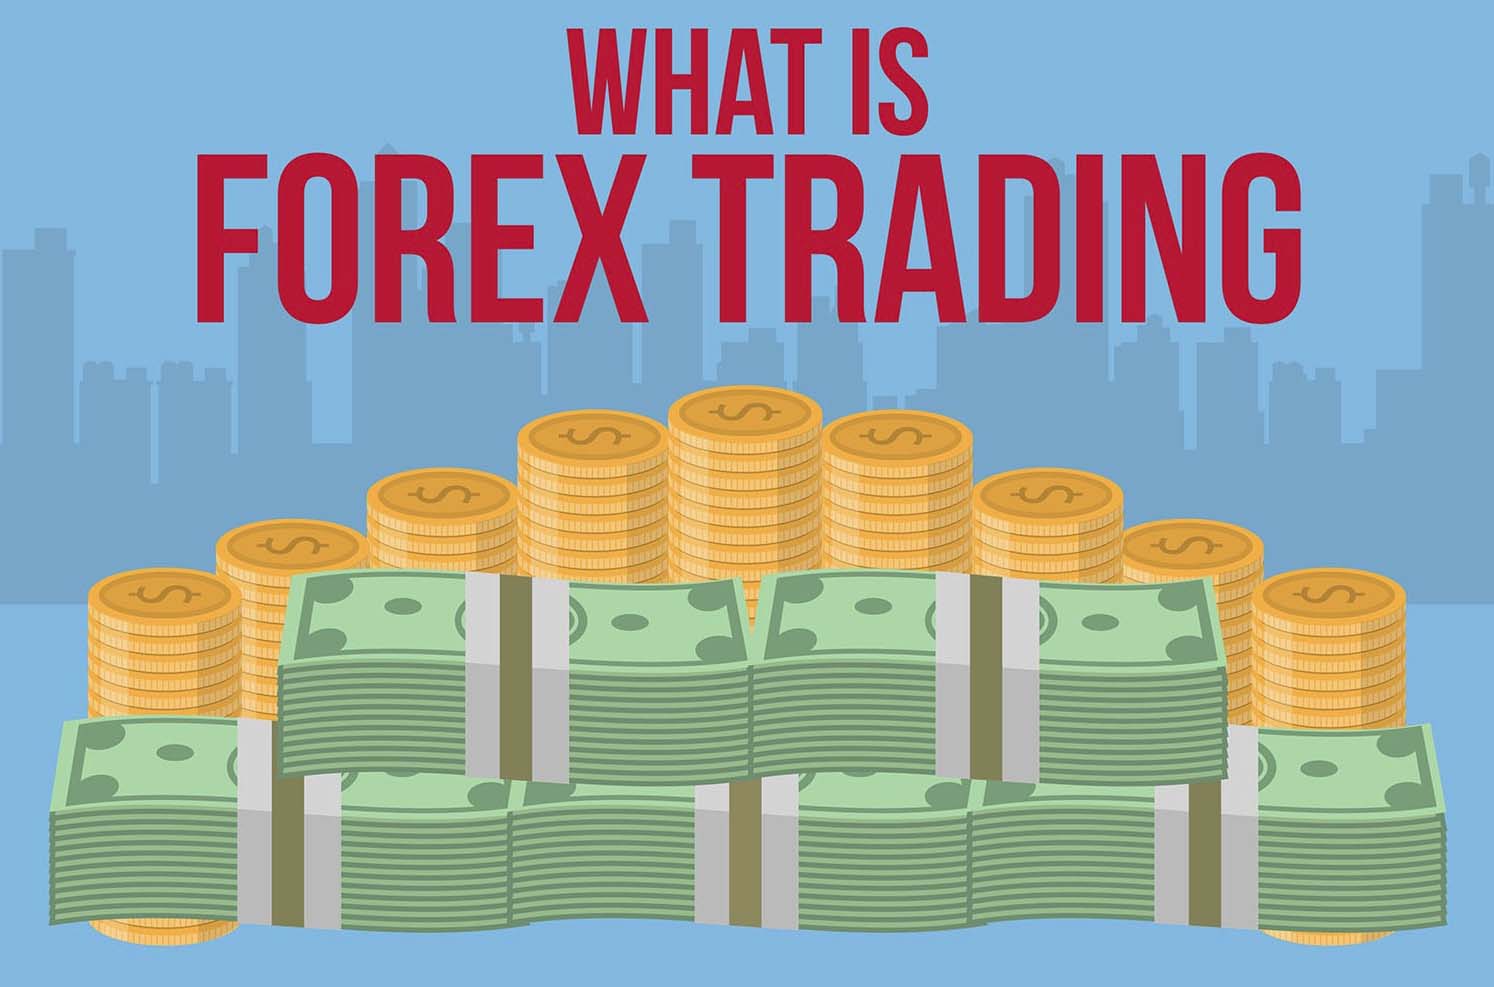 Meaning of forex